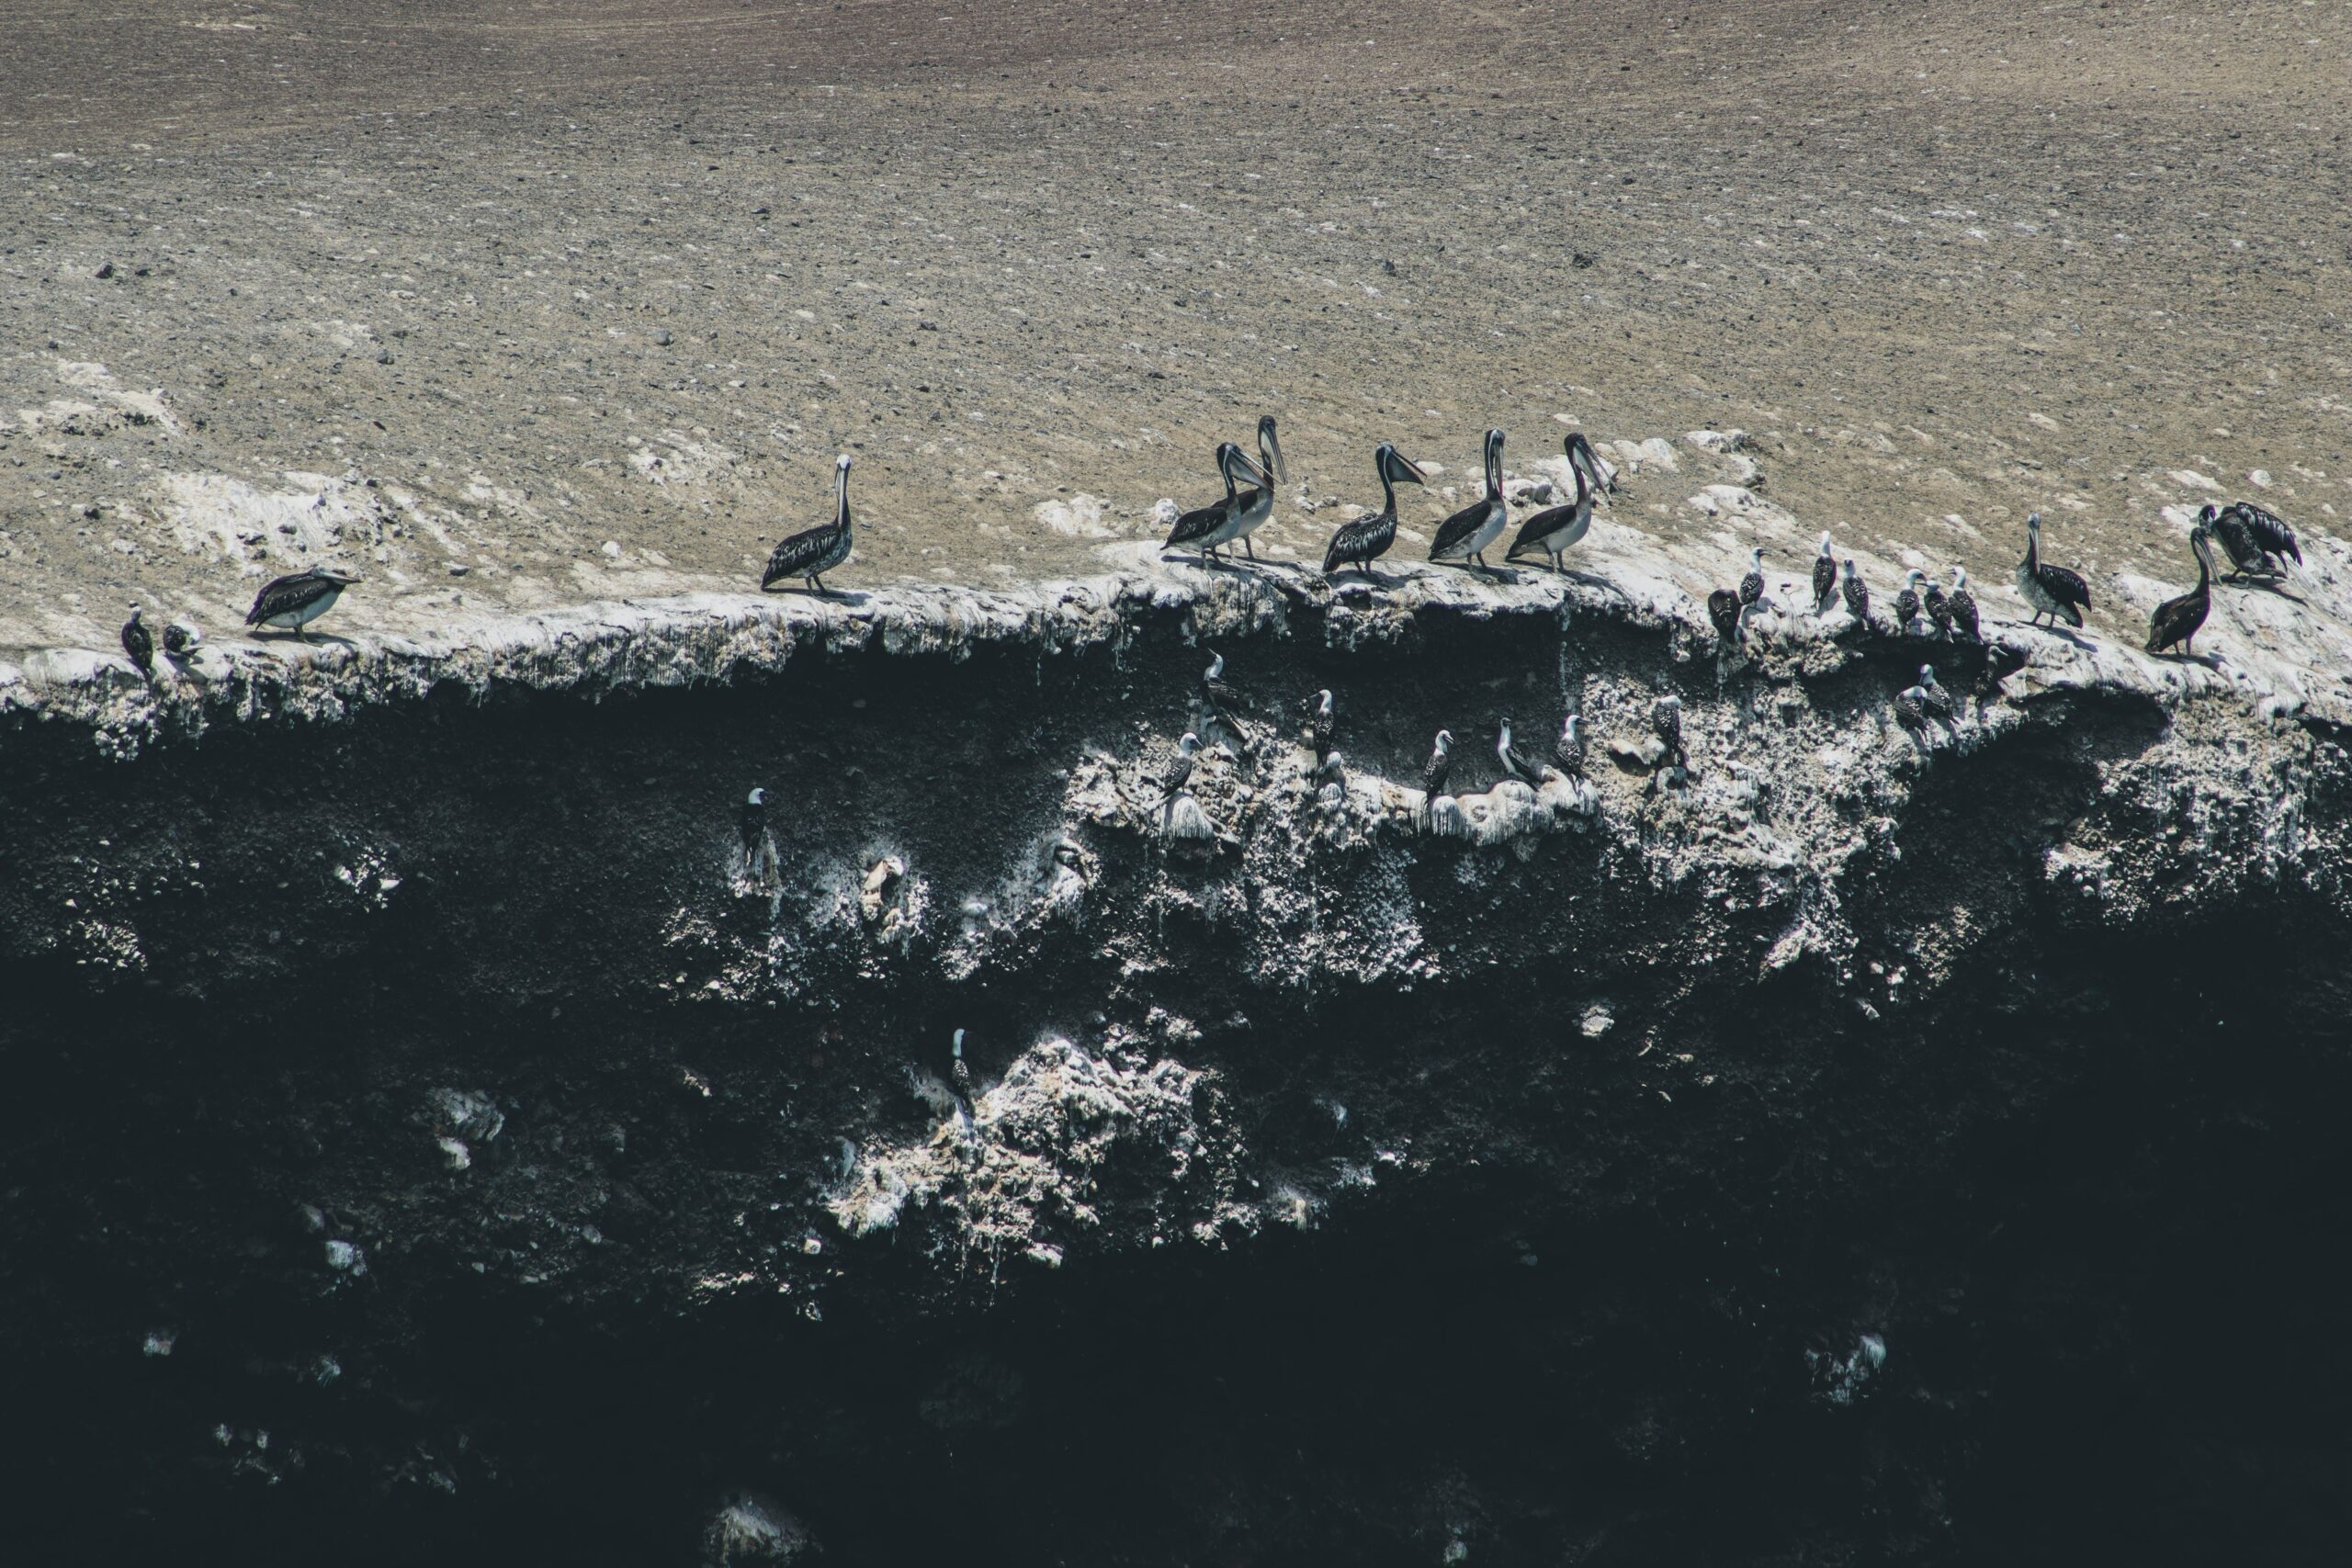 a flock of birds on the rocky shore